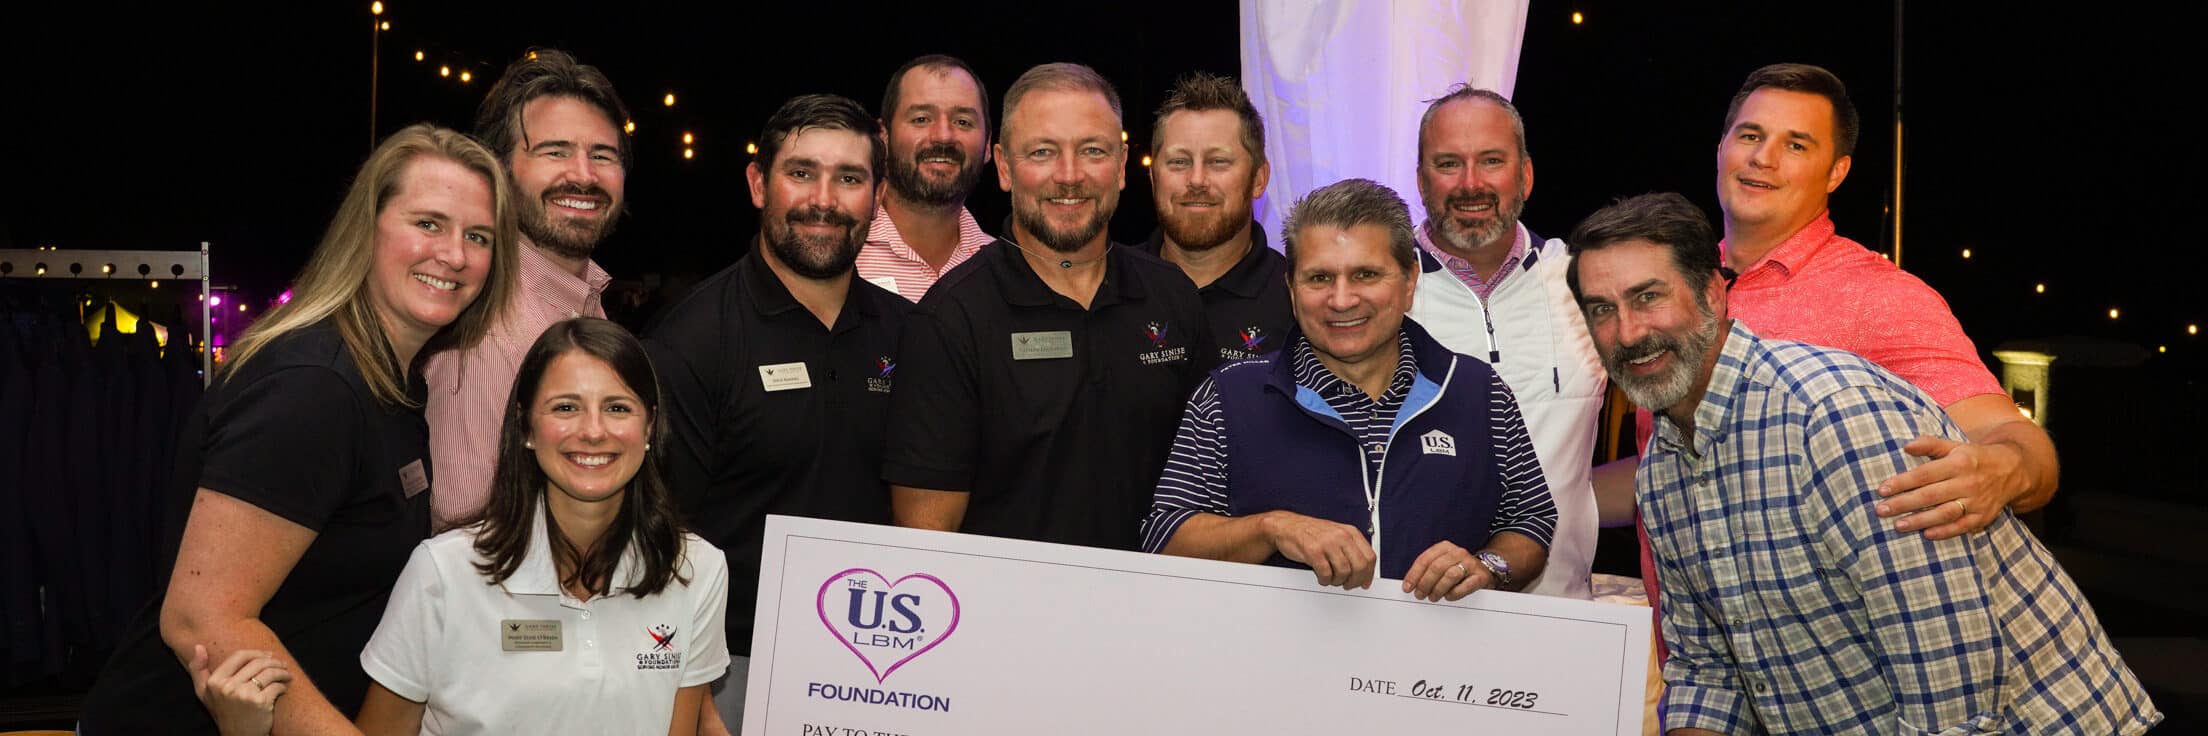 The US LBM Foundation presented a $300,000 contribution to the Gary Sinise Foundation, to support the R.I.S.E. (Restoring Independence Supporting Empowerment) program, which builds specially adapted smart homes for severely wounded veterans.